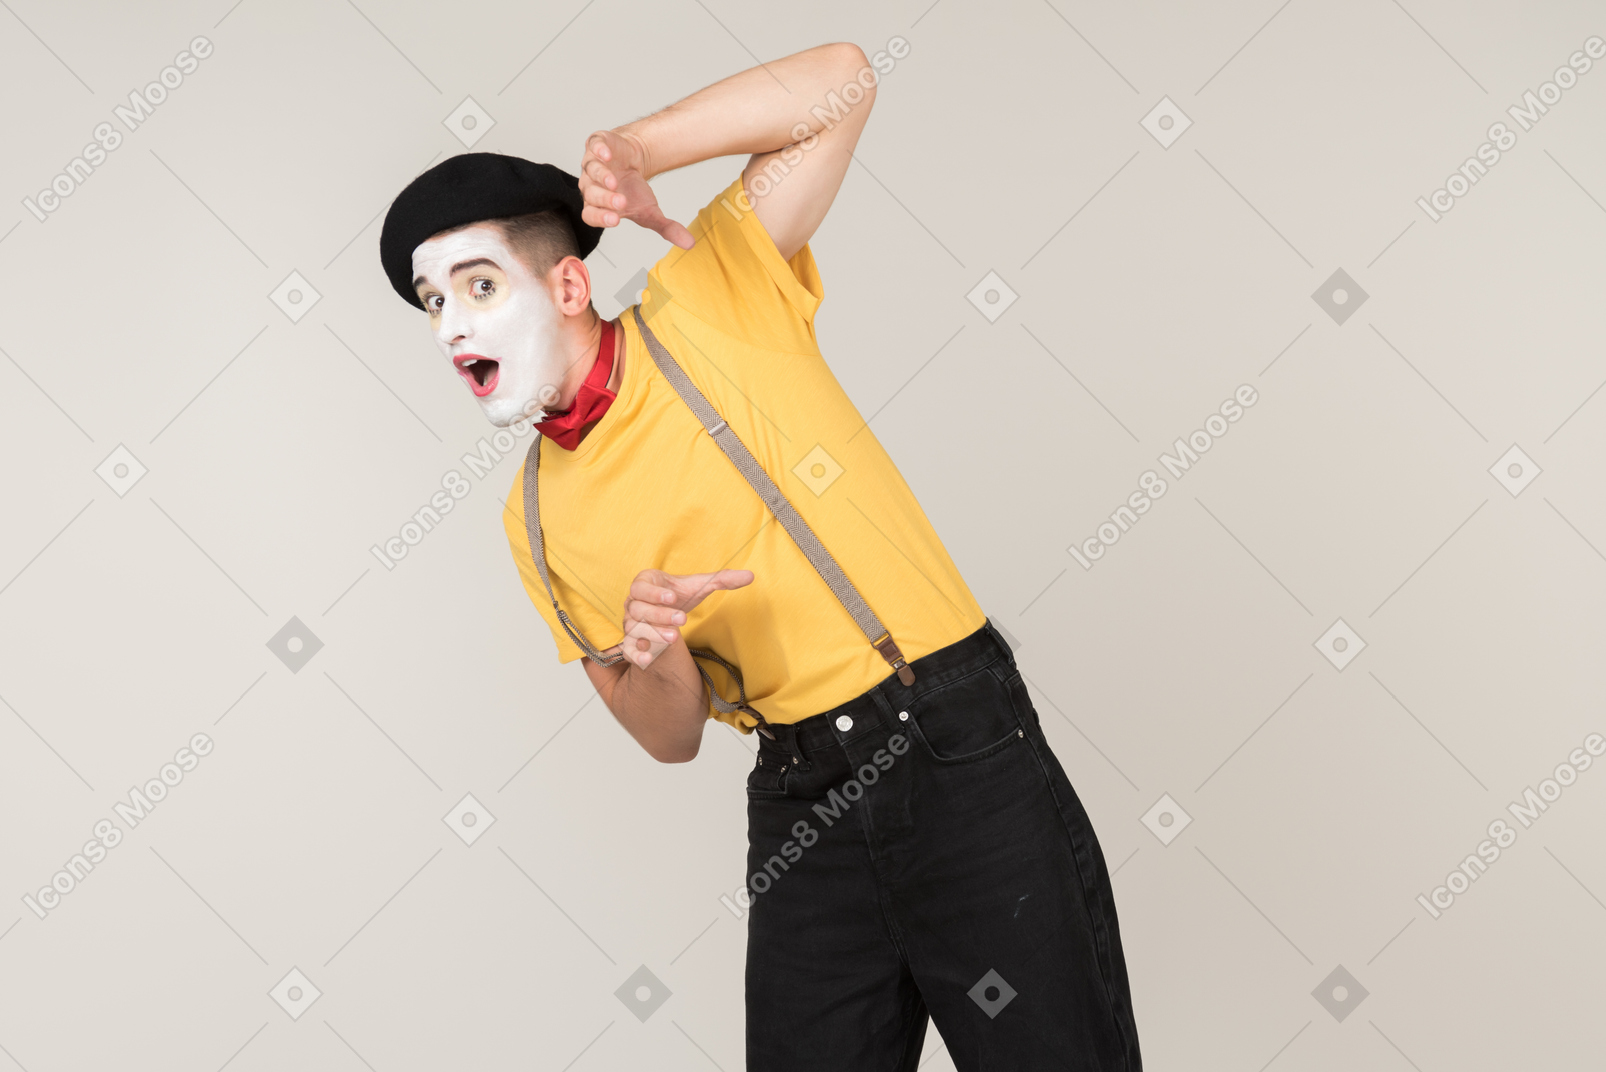 Male mime fooling around